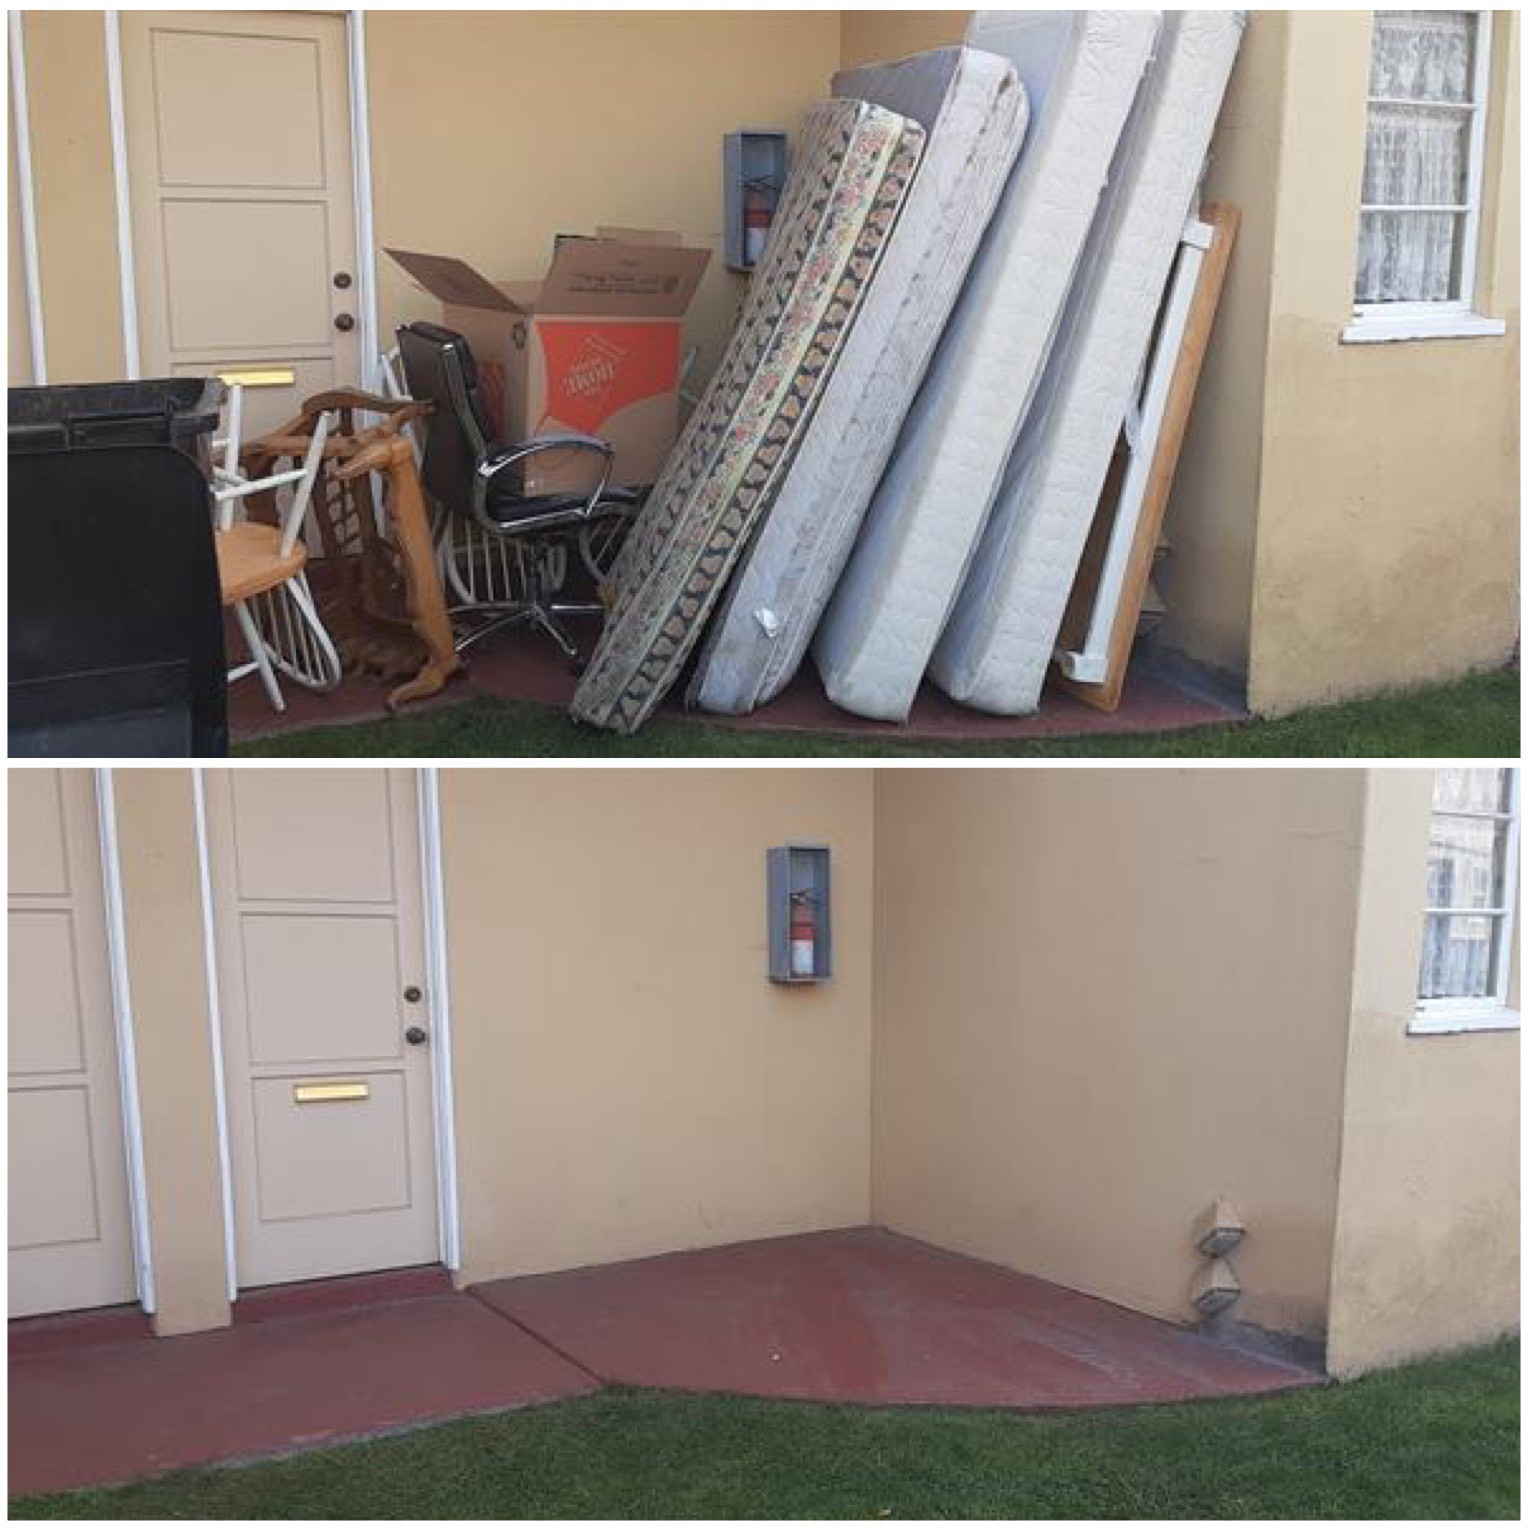 Before and after from an apartment cleanout. We helped the customer with their remaining apartment items and made it easy for them to move. Junk King is here to help you with your next transition! Check out our website today for your next junk hauling job. https://www.junk-king.com/san-diego-downtown